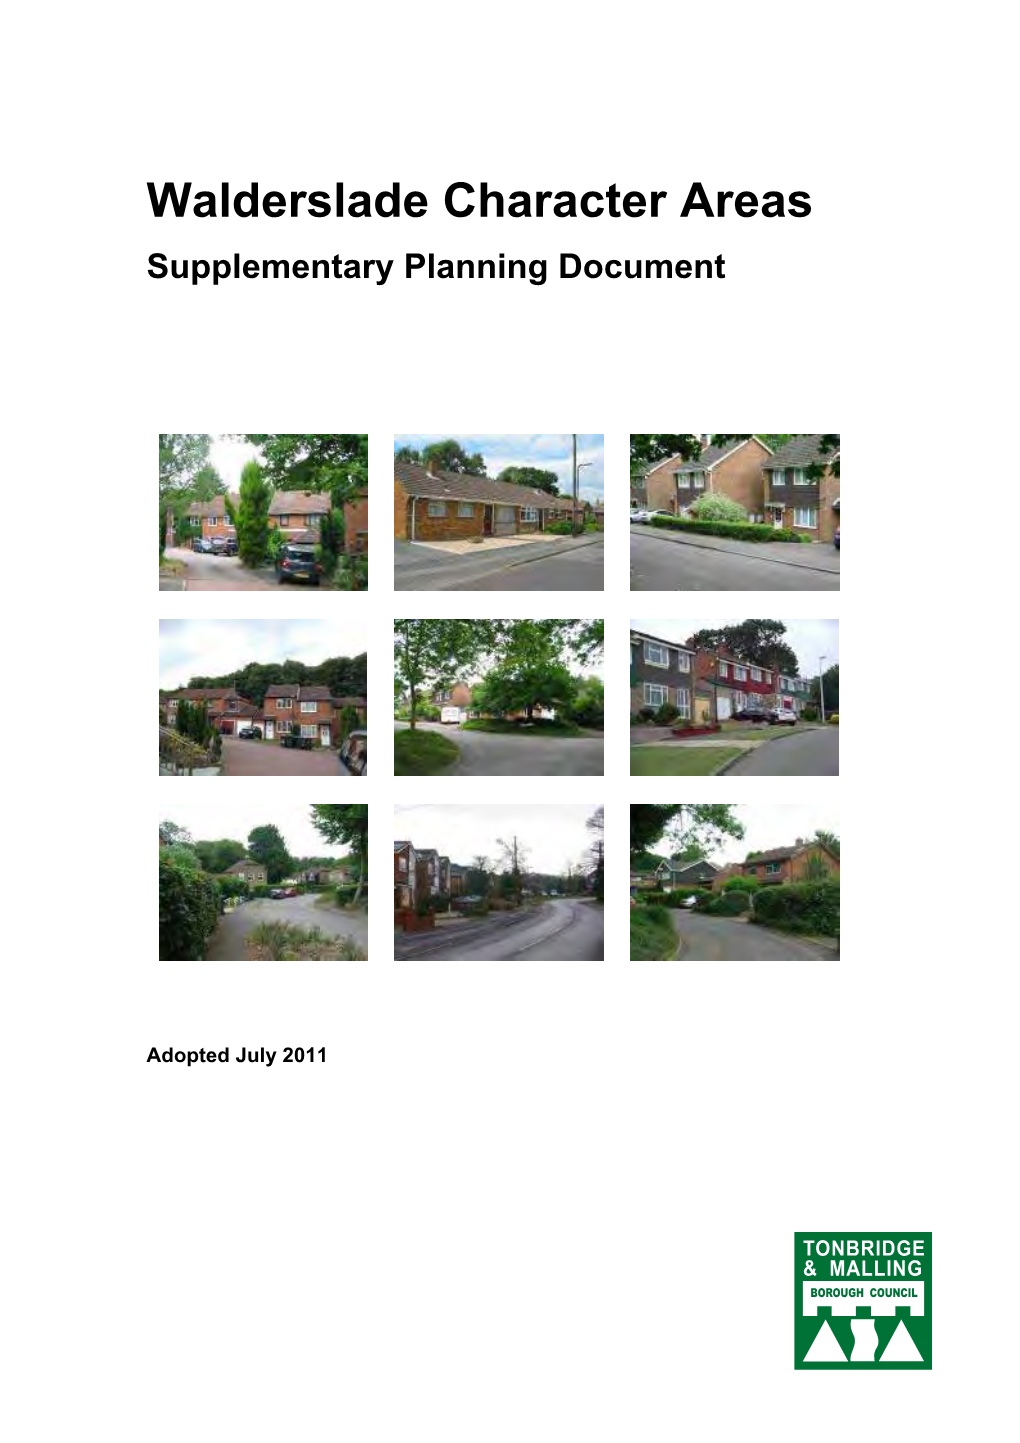 Walderslade Character Areas Supplementary Planning Document